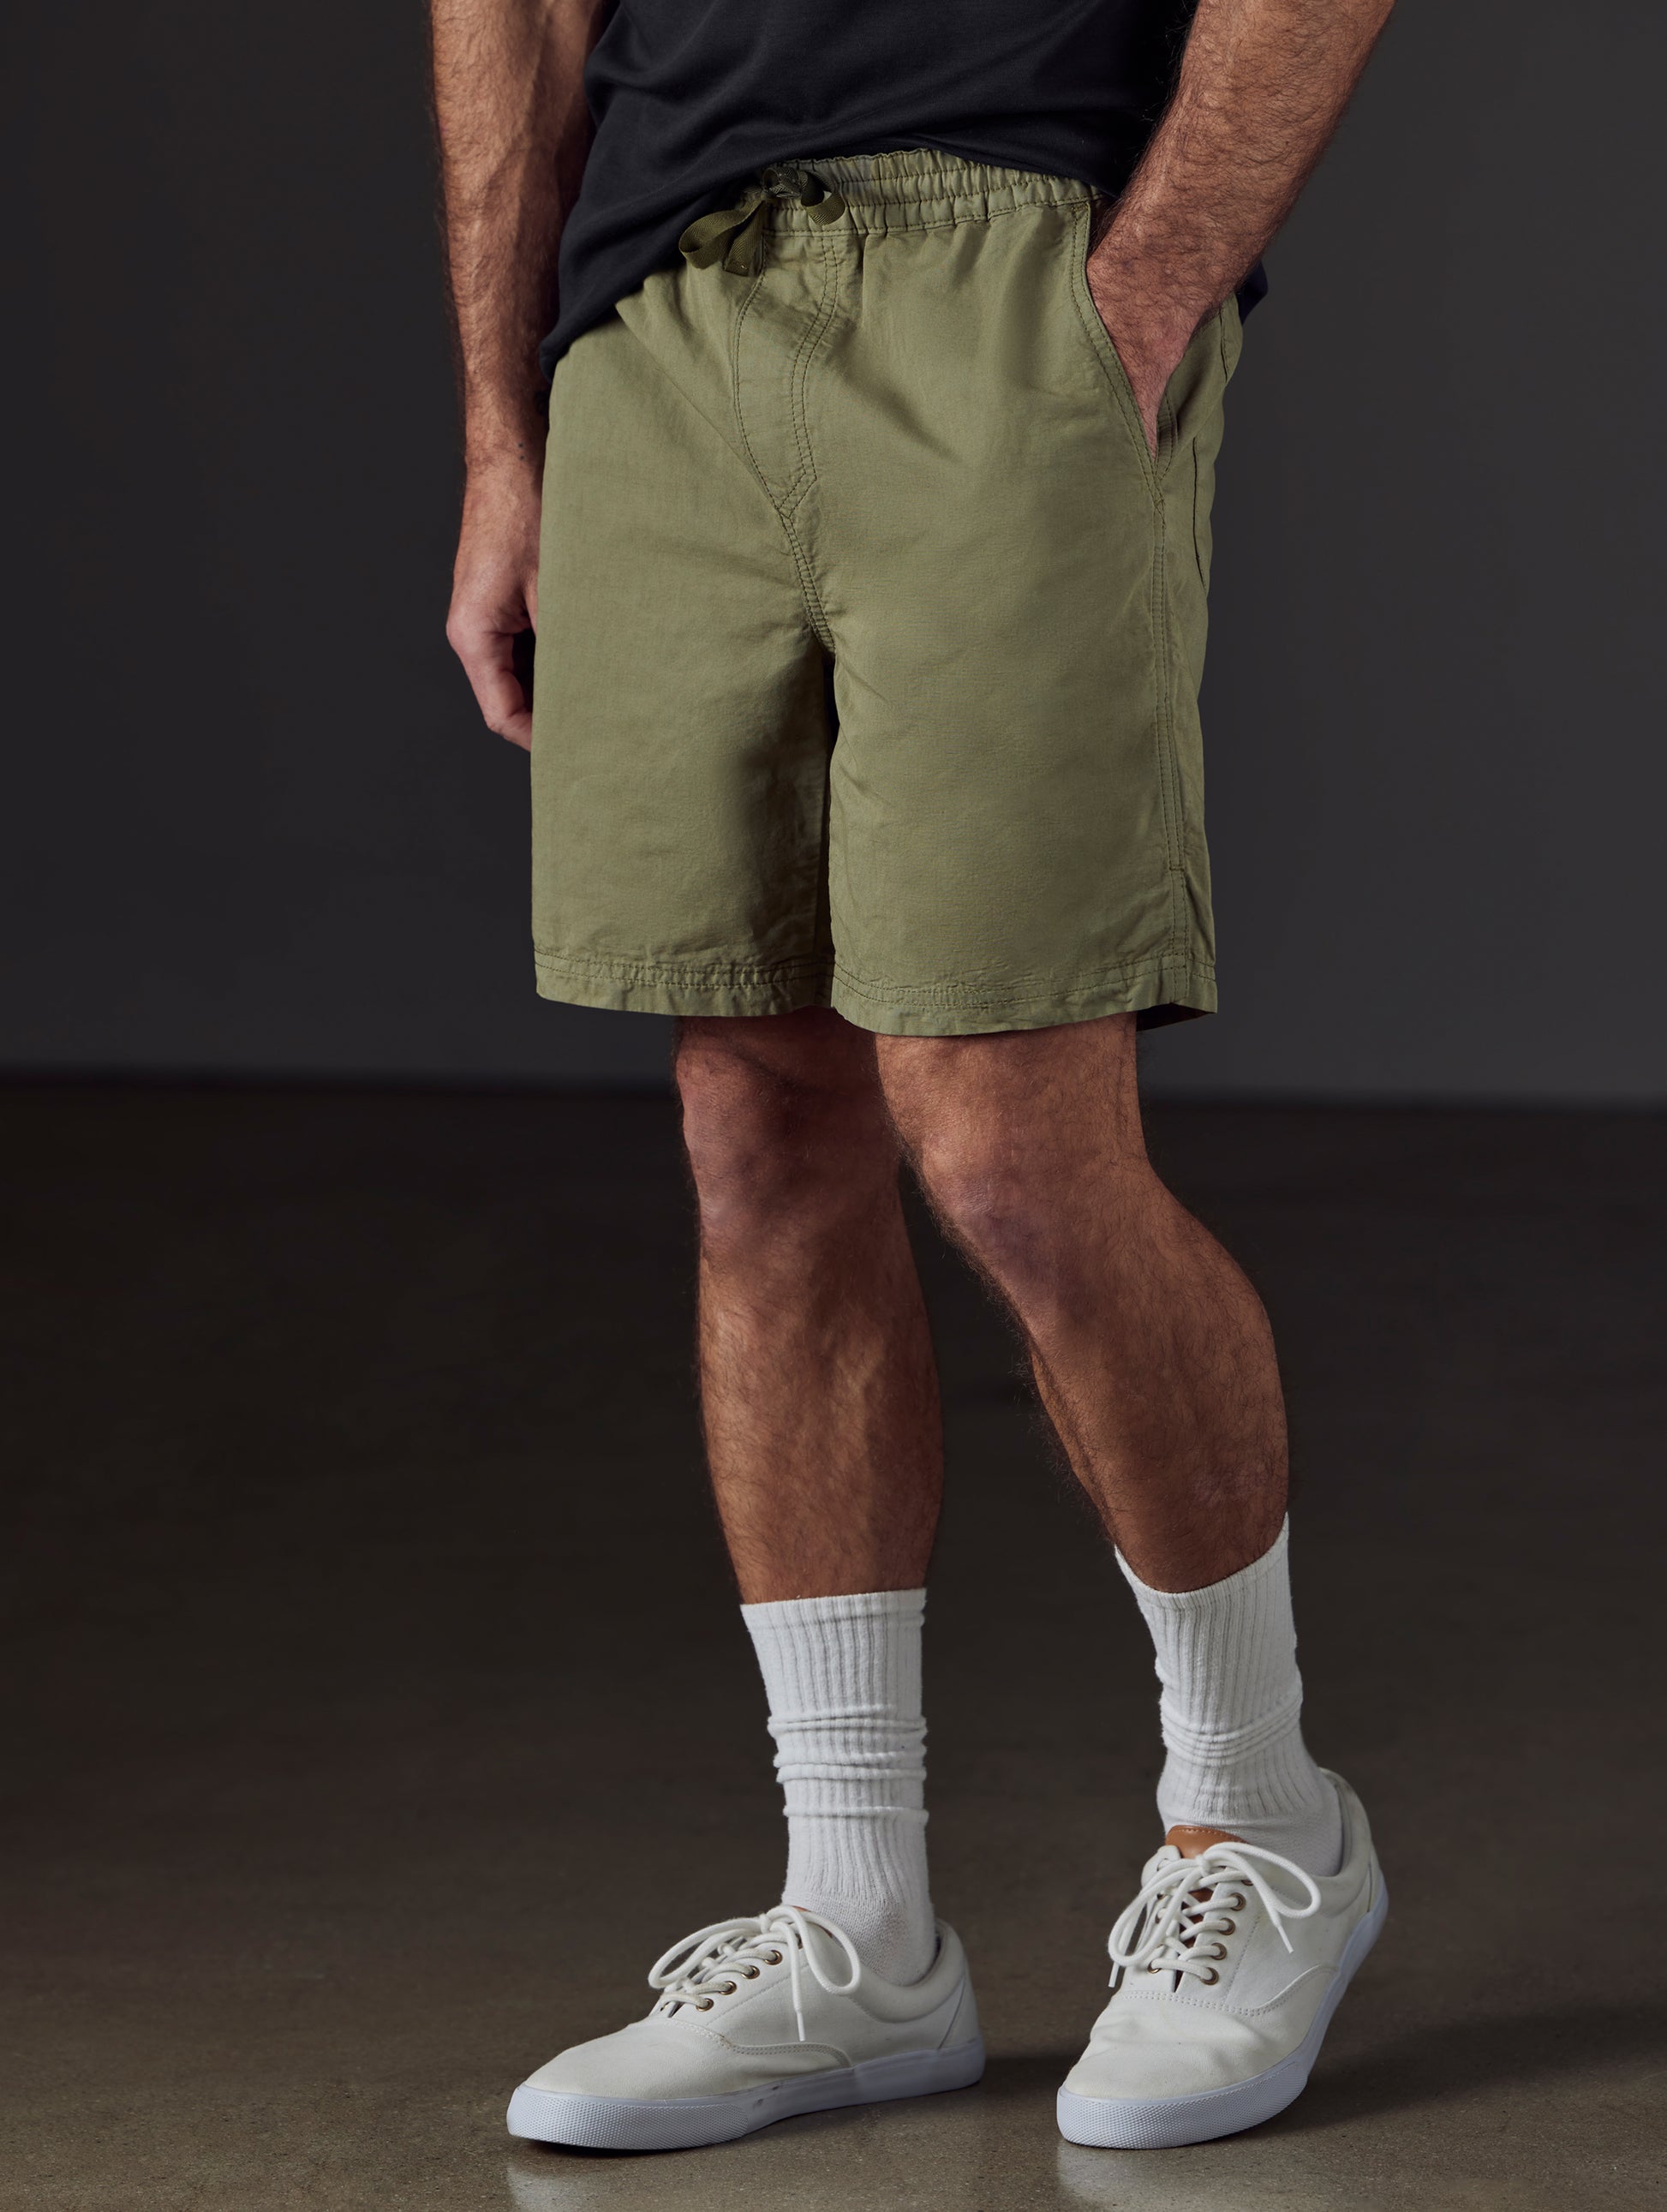 green fatigue short from AETHER Apparel